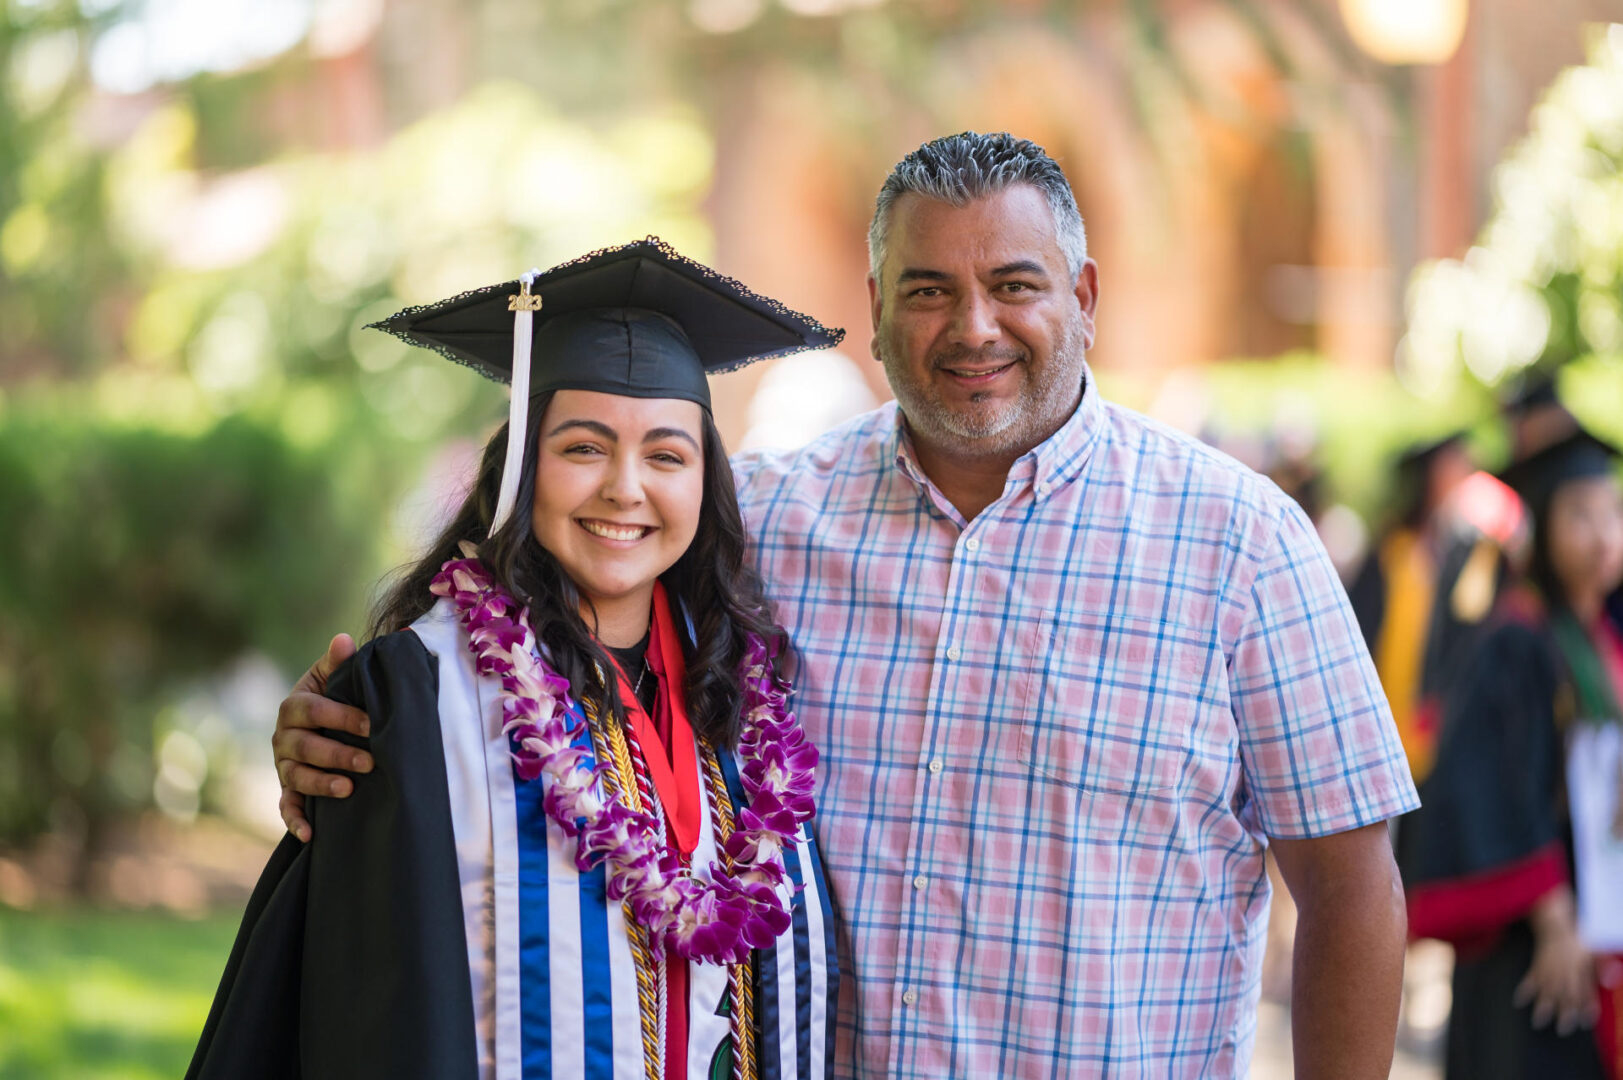 a graduating student wearing cap and gown smiles with a man having his arm around her